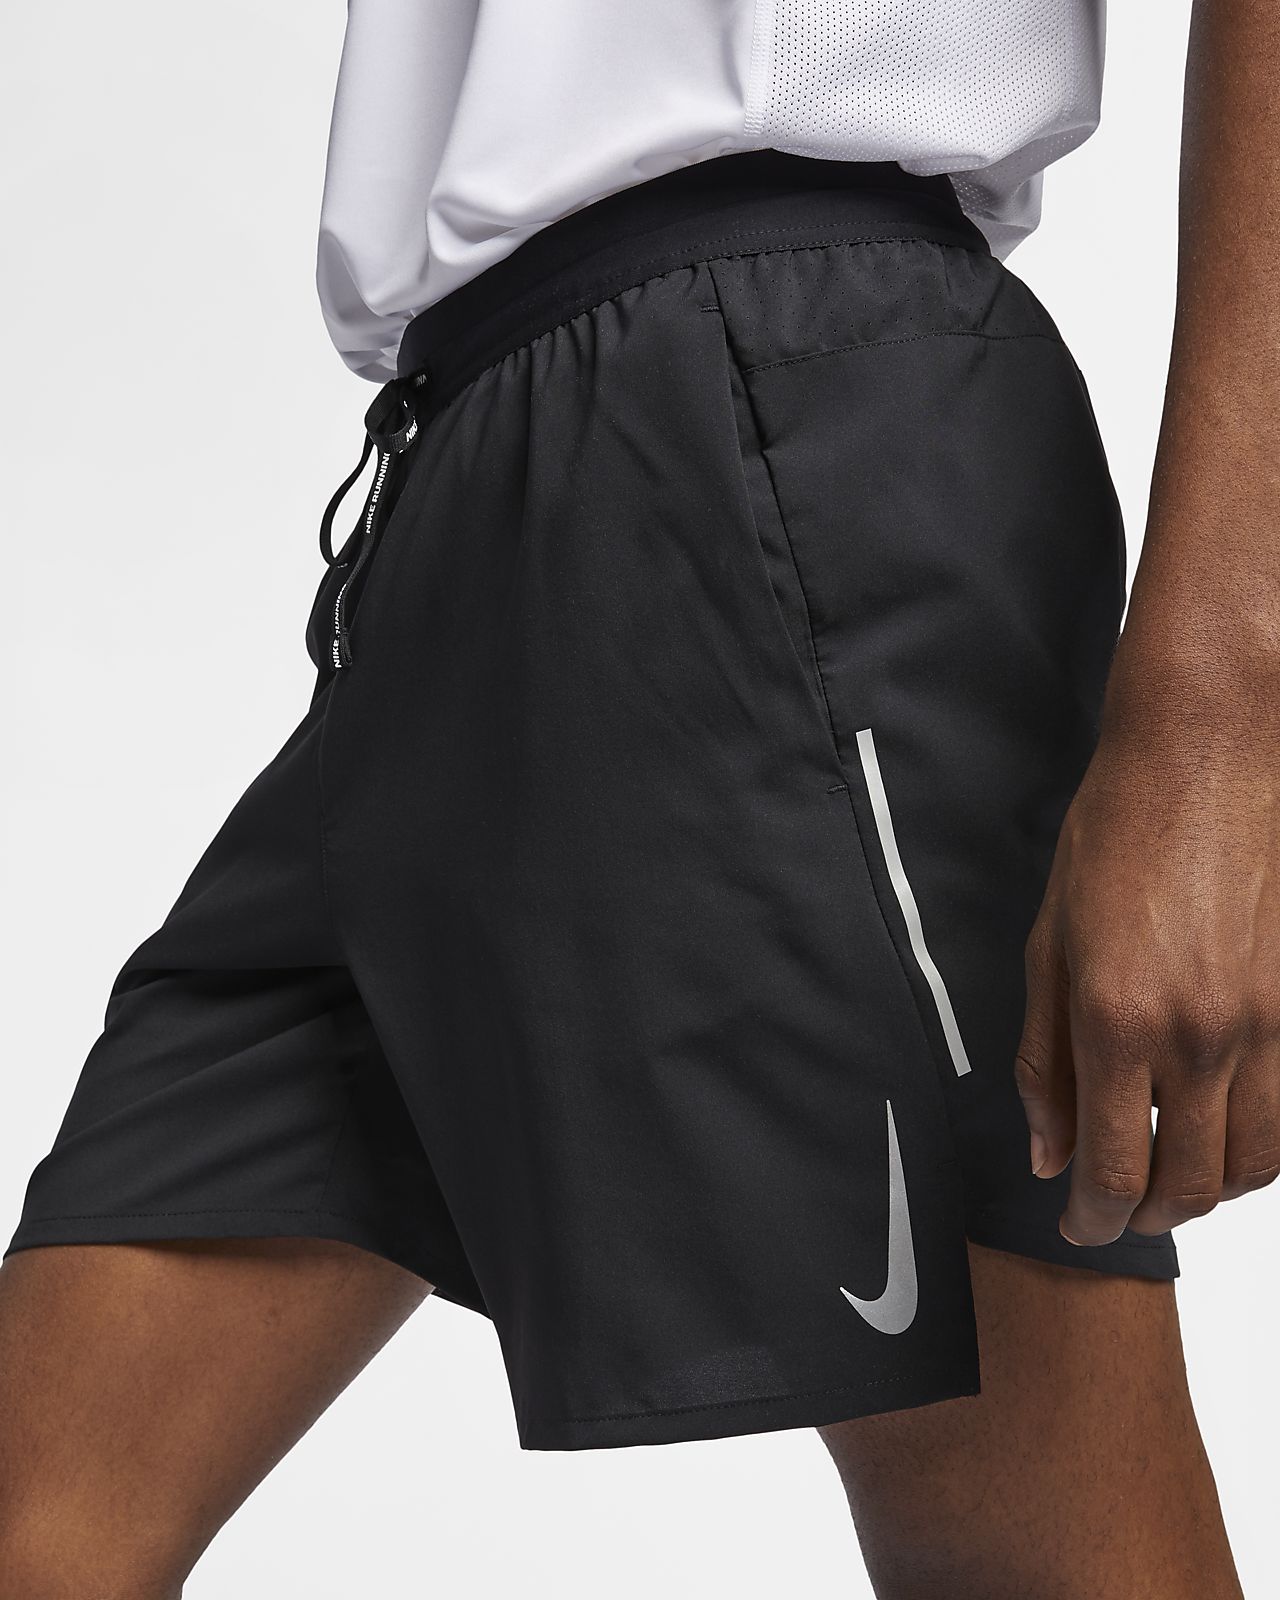 nike running shorts with zip pockets